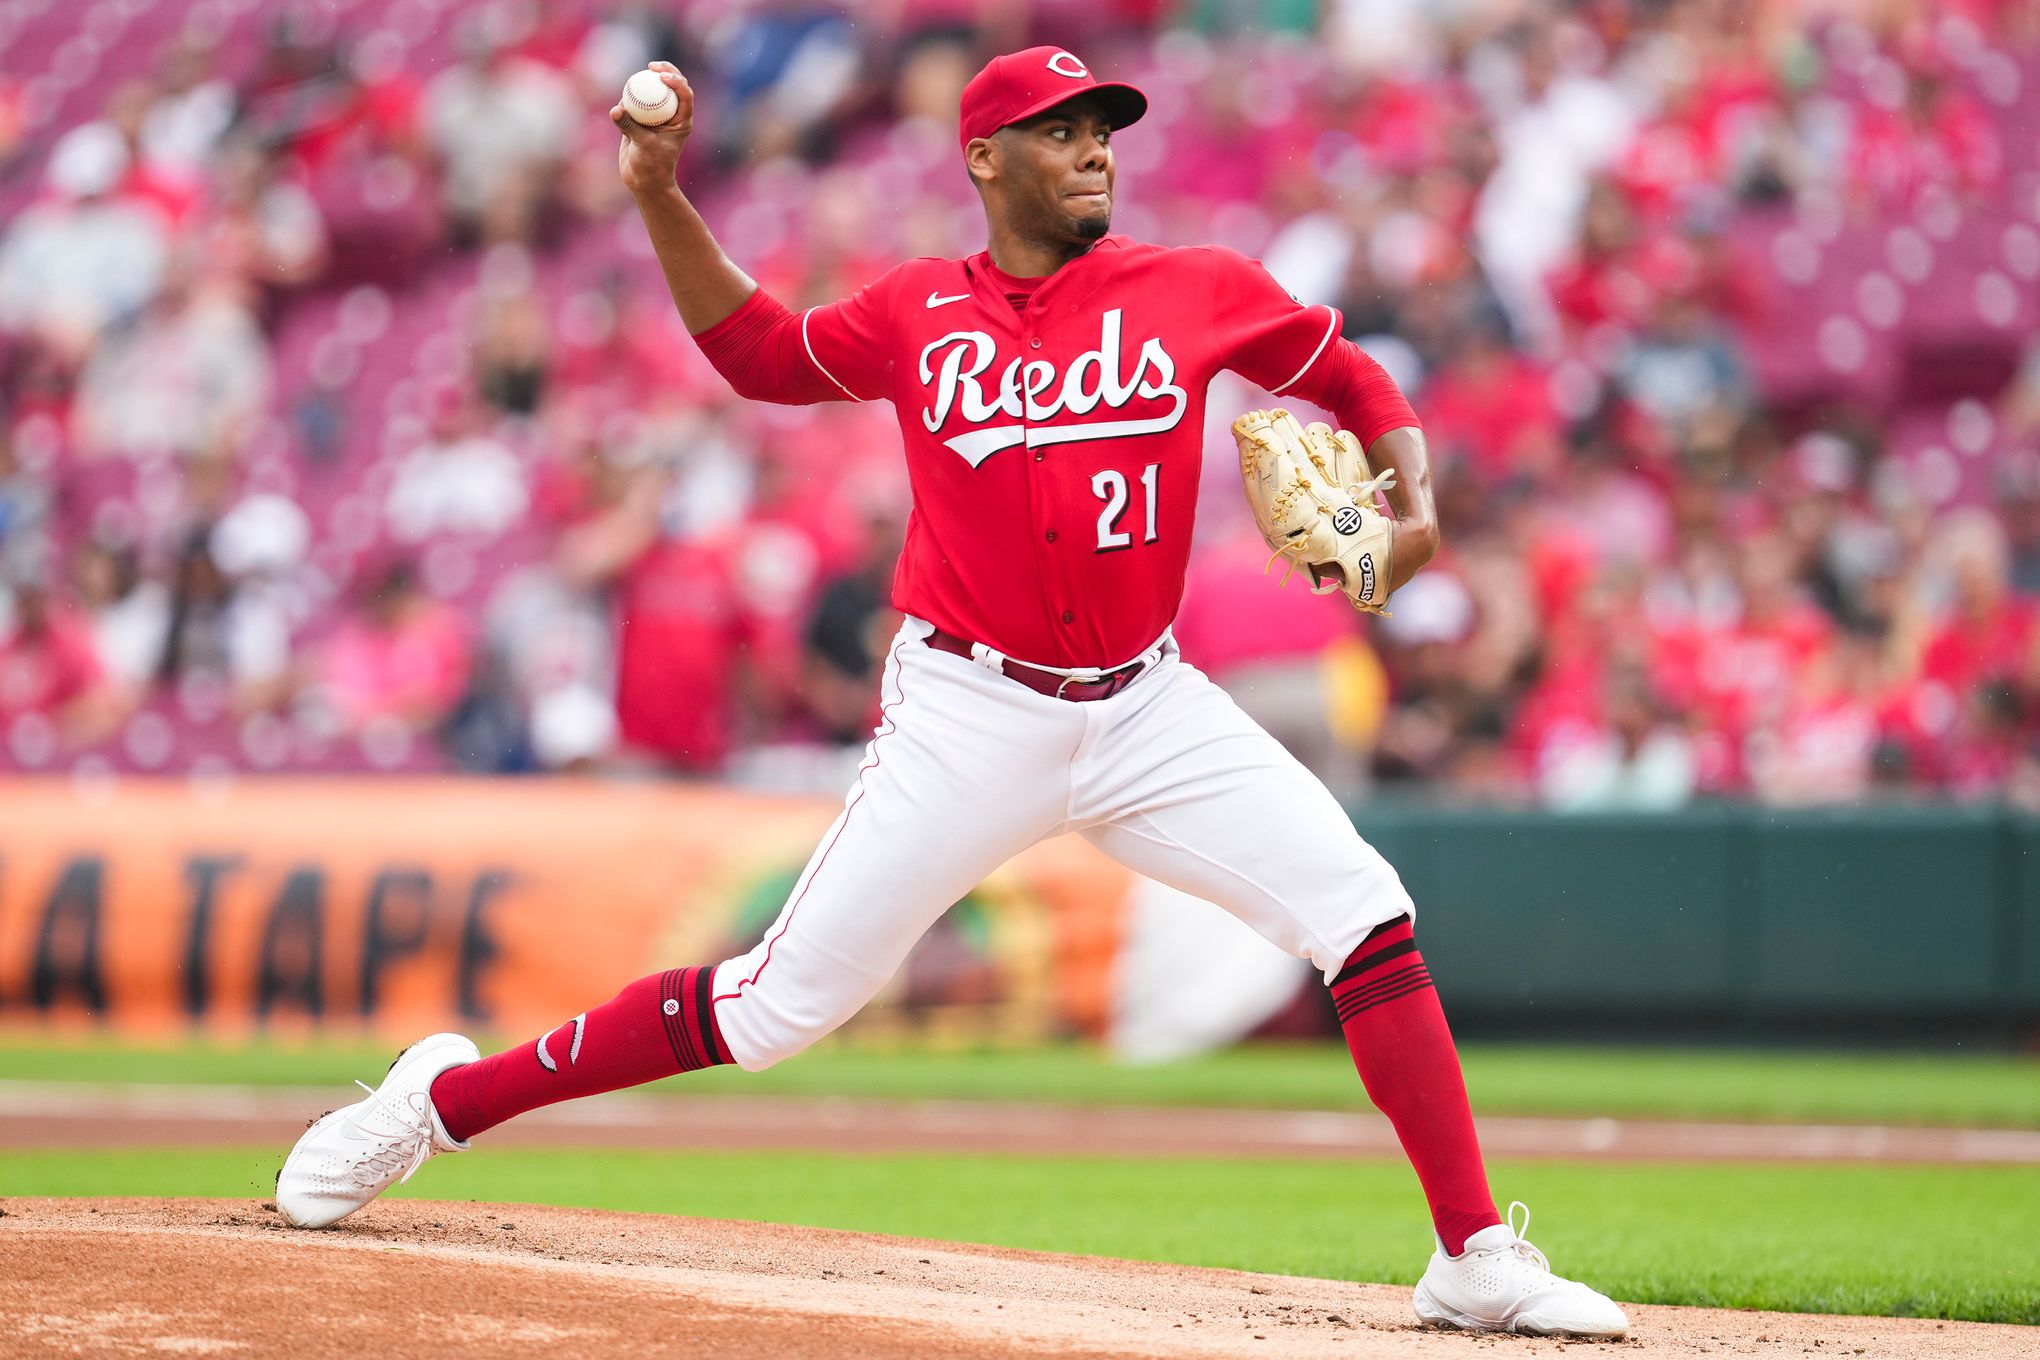 Reds to sign Donovan Solano and Buck Farmer